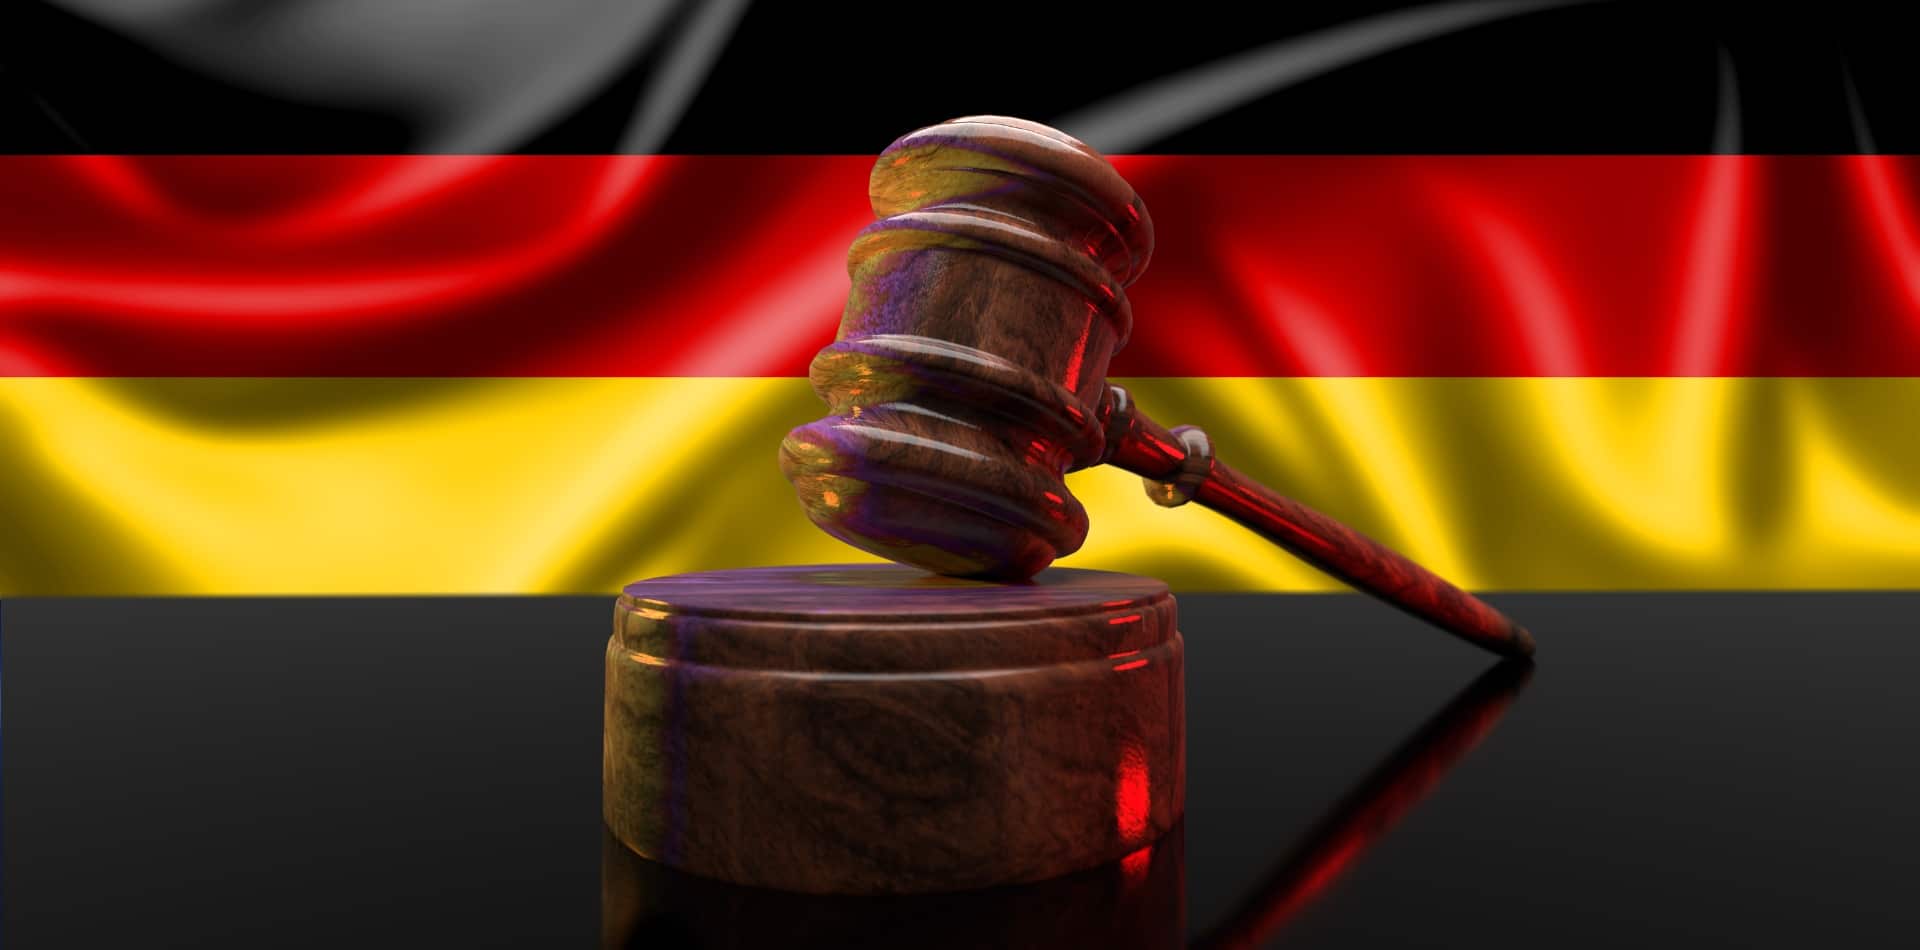 Germany Leads The Global Medical Cannabis Explosion